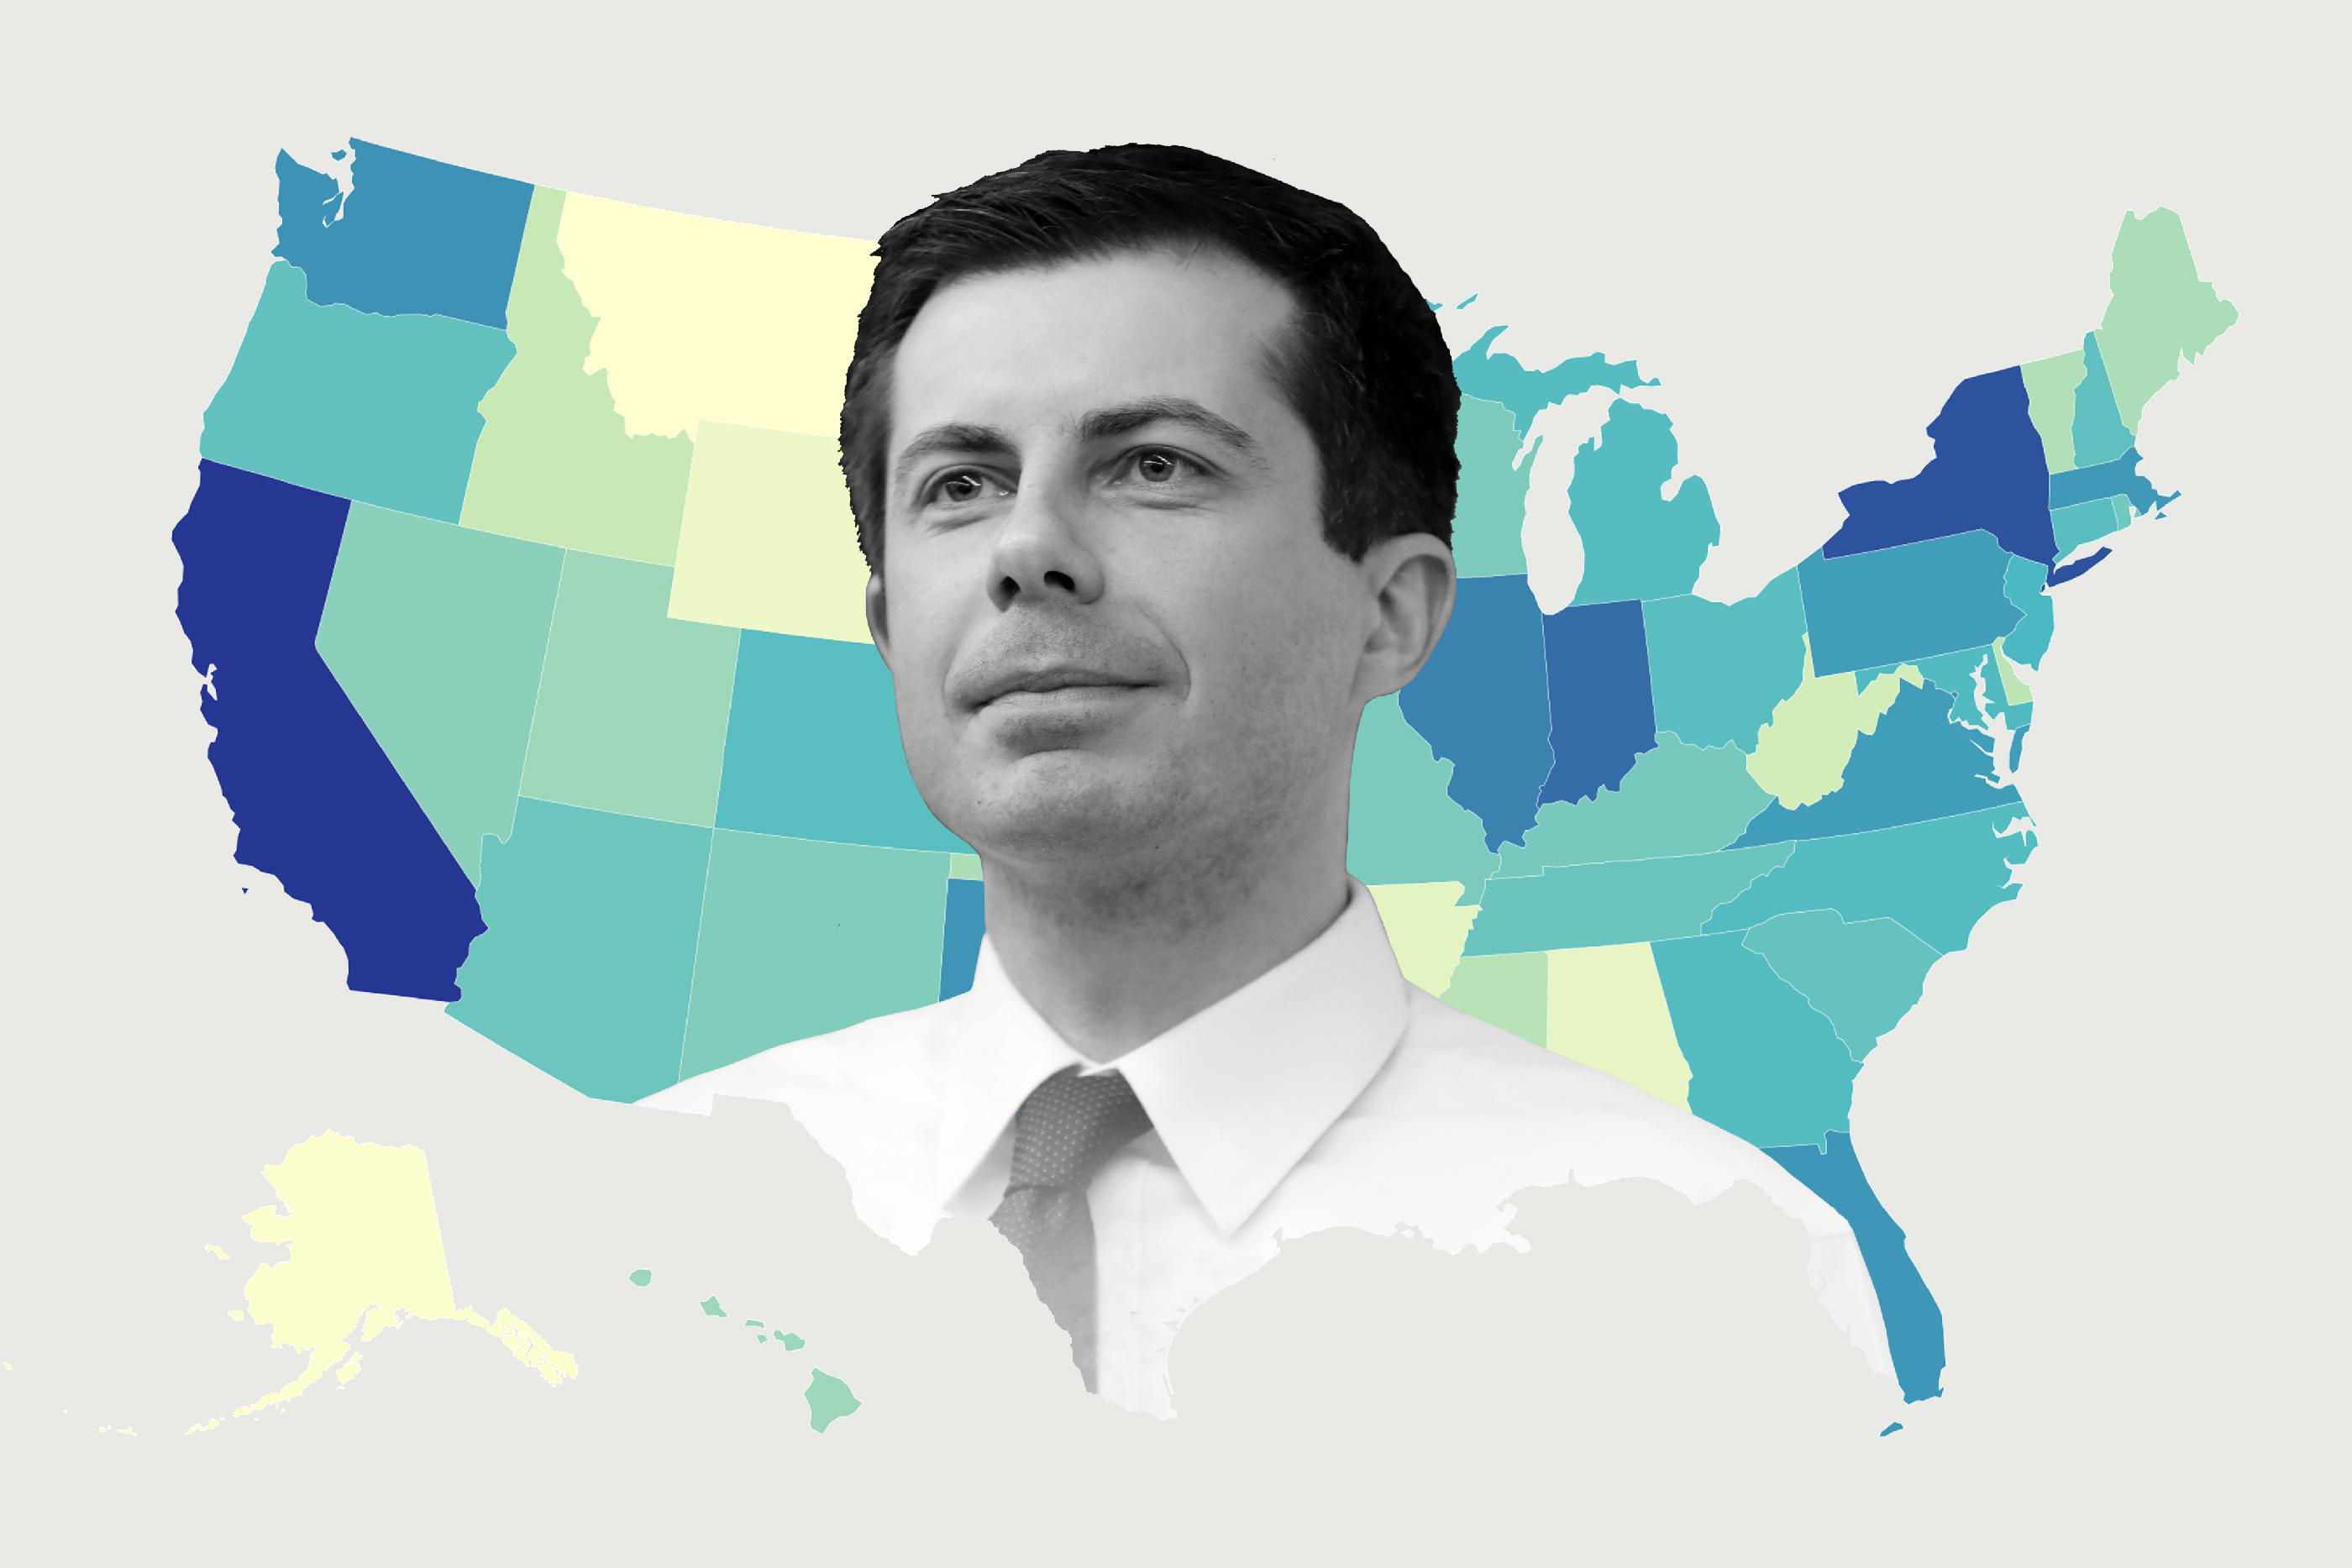 Mayor Pete Buttigieg Is Raising Millions for His 2020 Campaign. This Map Shows Who's Giving the Most